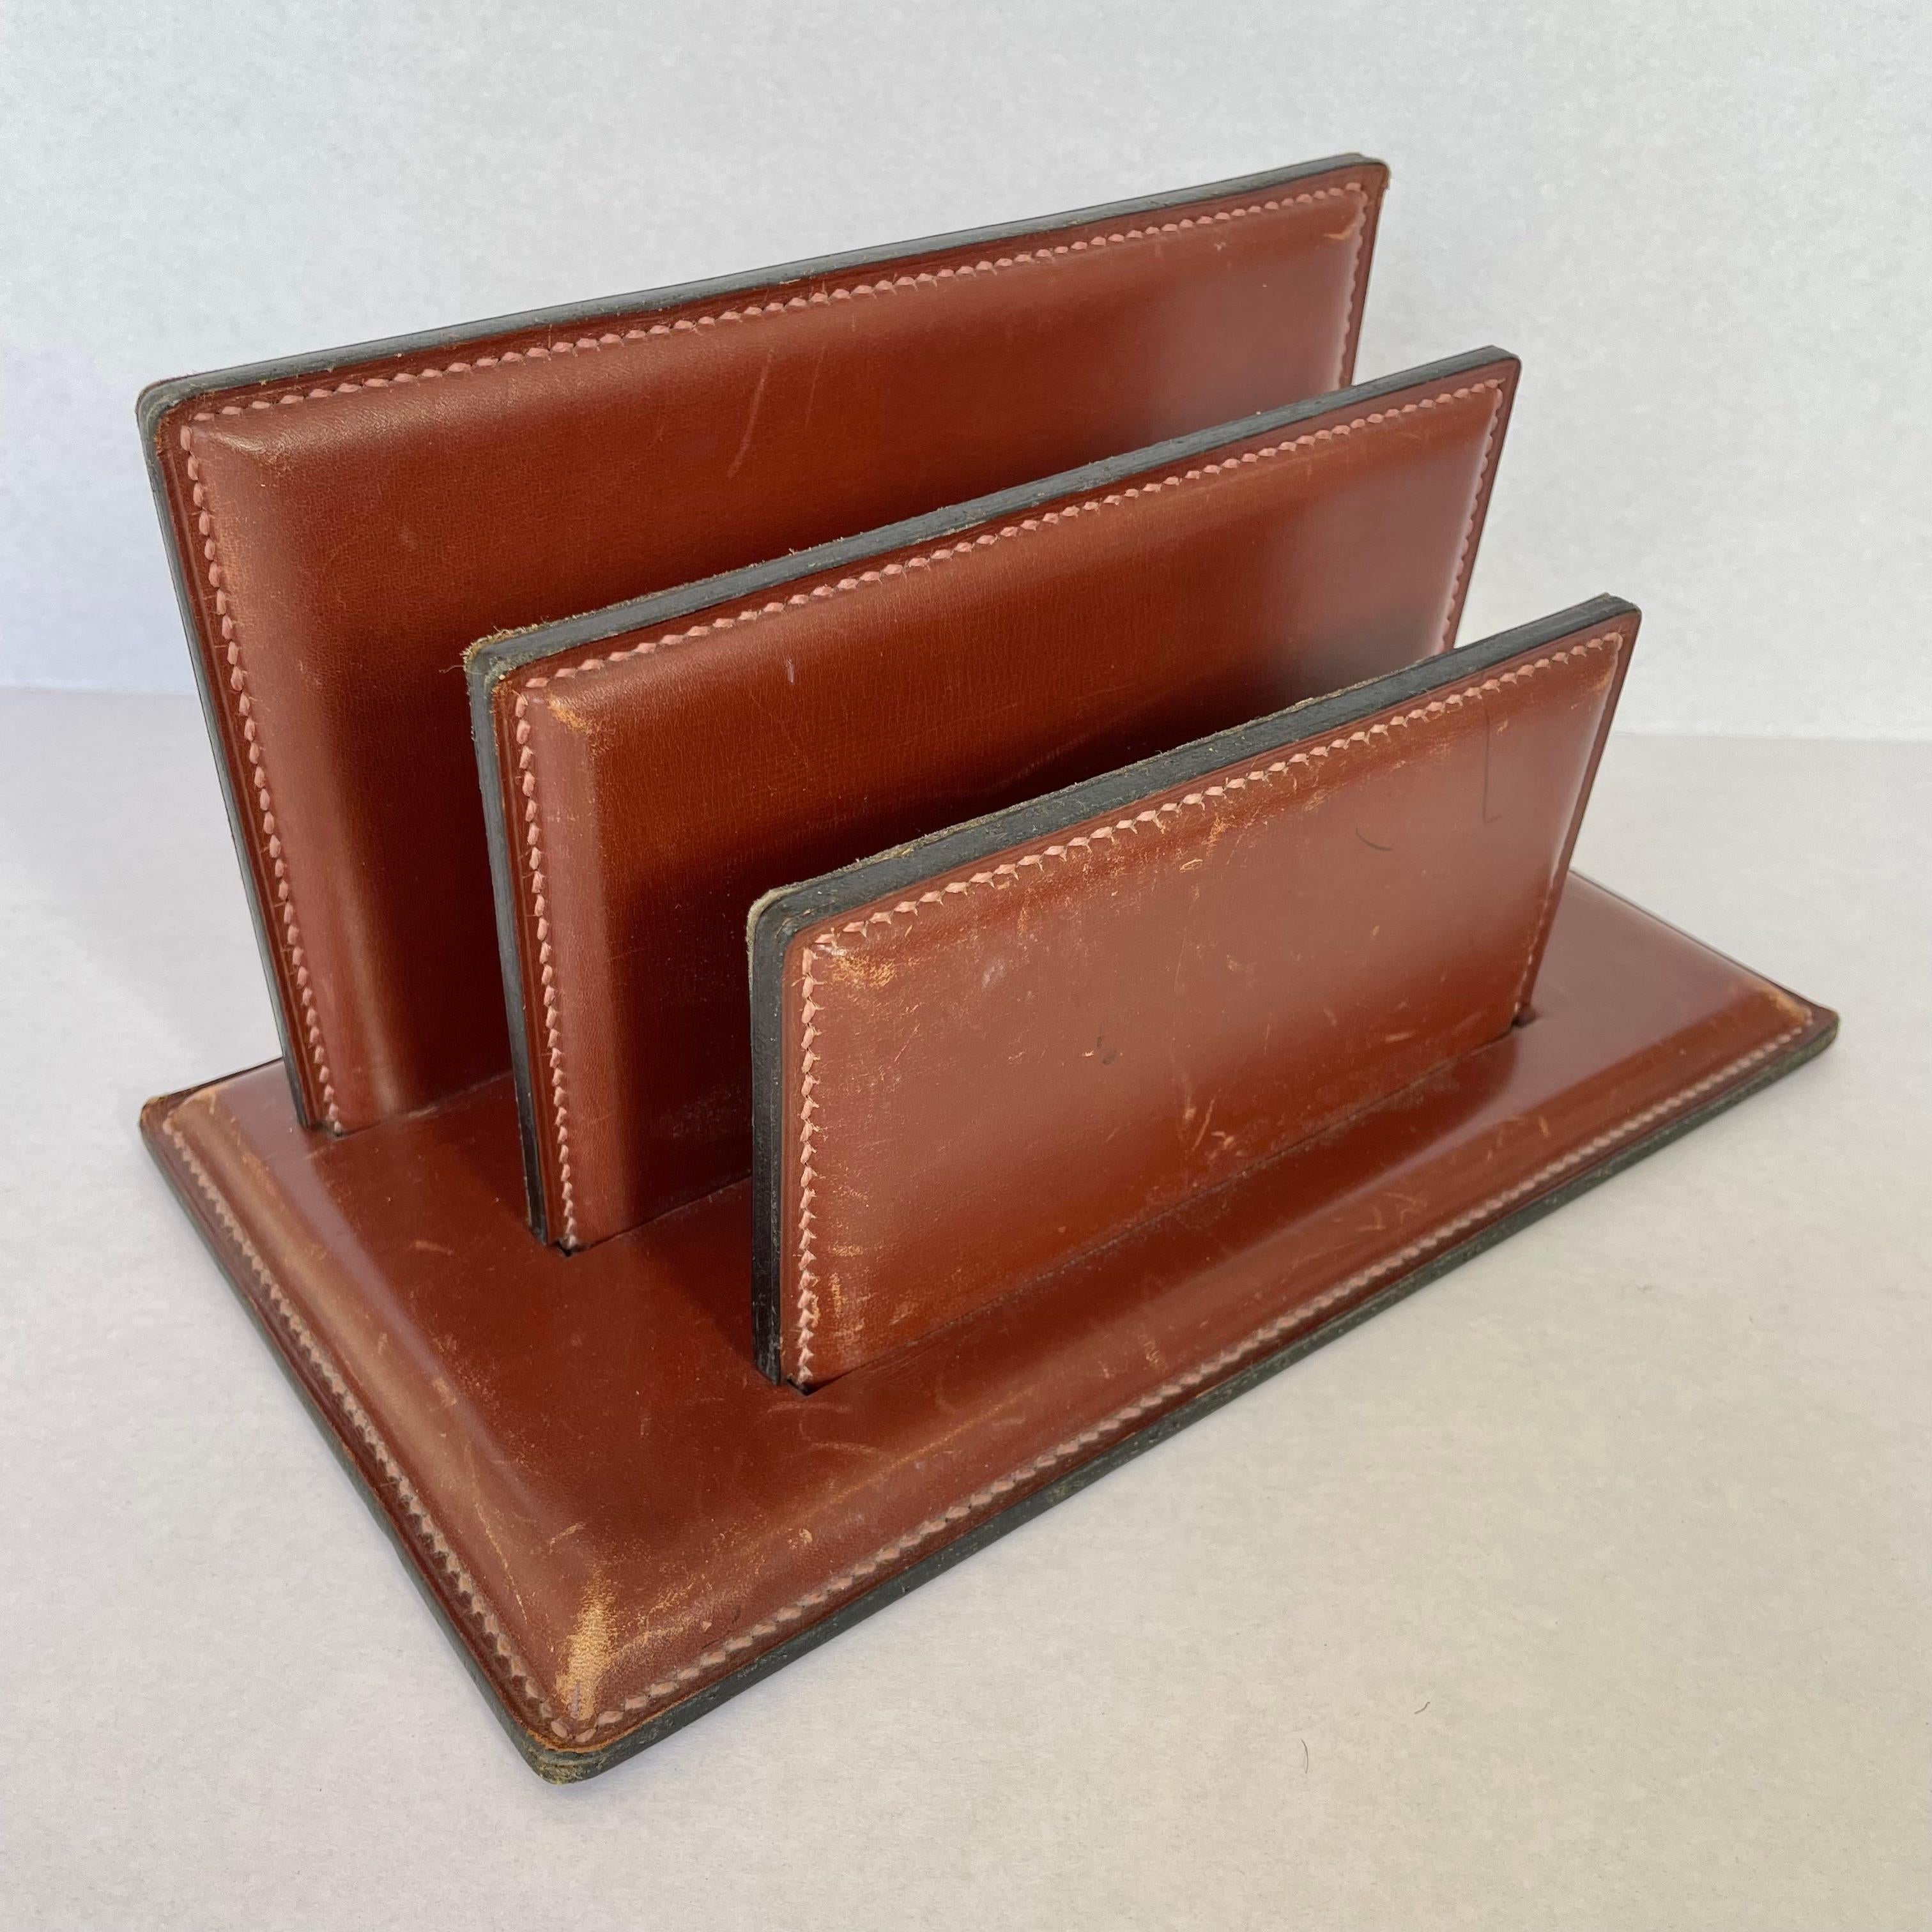 Classy French leather mail organizer in the style of Jacques Adnet. Wrapped in thick saddle leather, this organizer is stamped with its address of origin in Paris. The base is stamped 